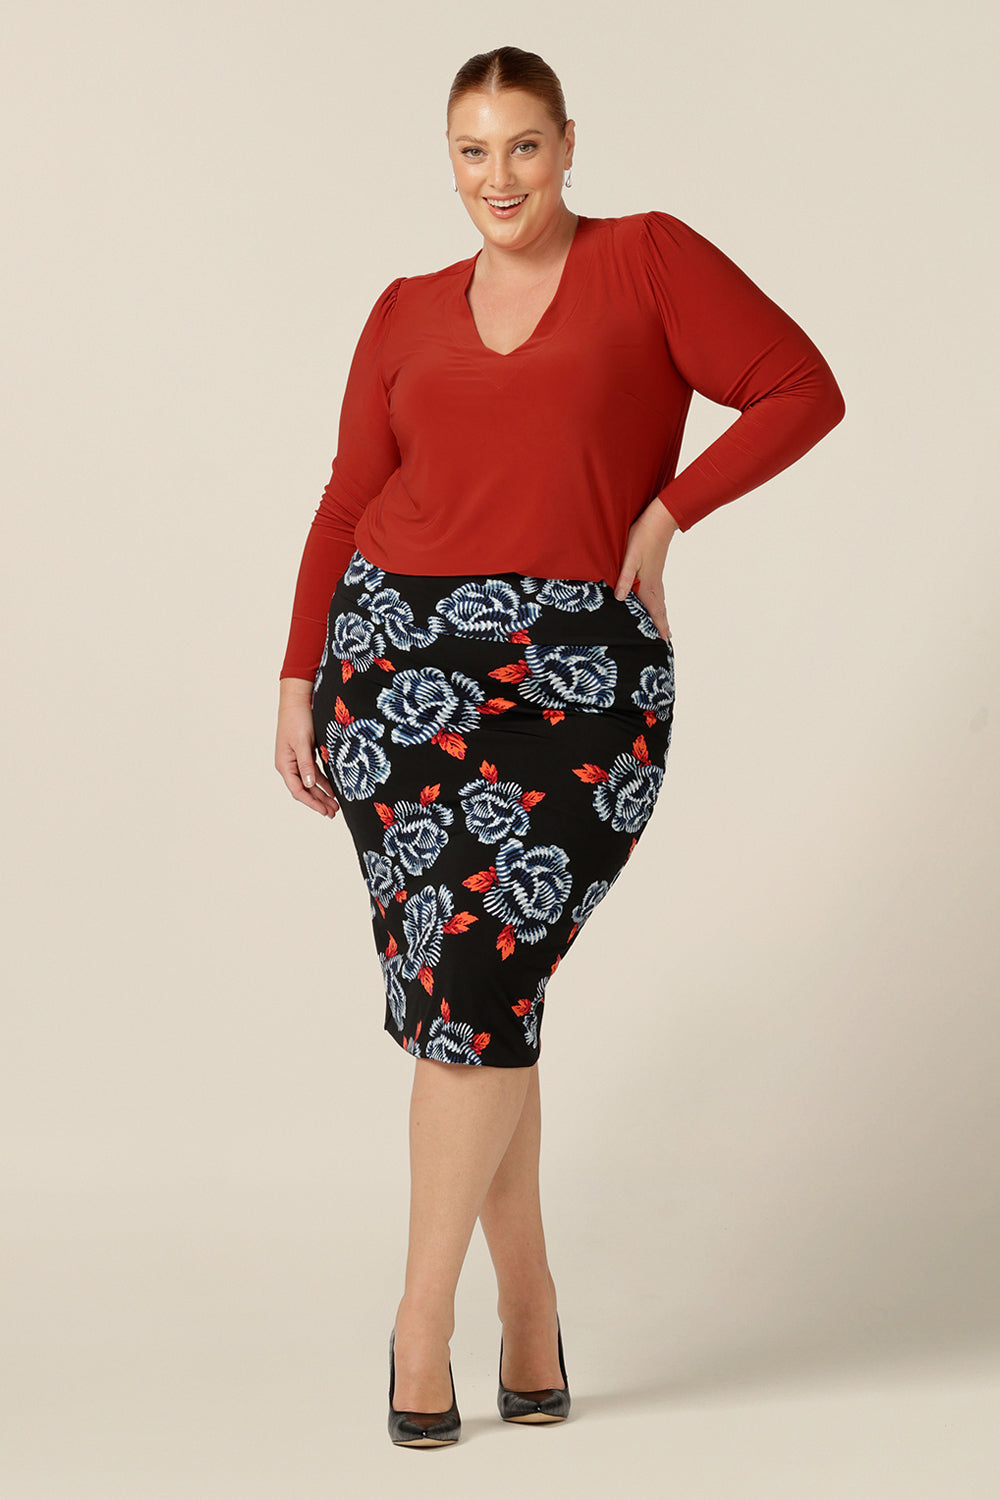 Tops for petite to plus size women, L&F's great range of women's tops includes this V-neck jersey top with long sleeves. In orange dry-touch jersey, this coloured top is worn with a floral print tube skirt for an office look.